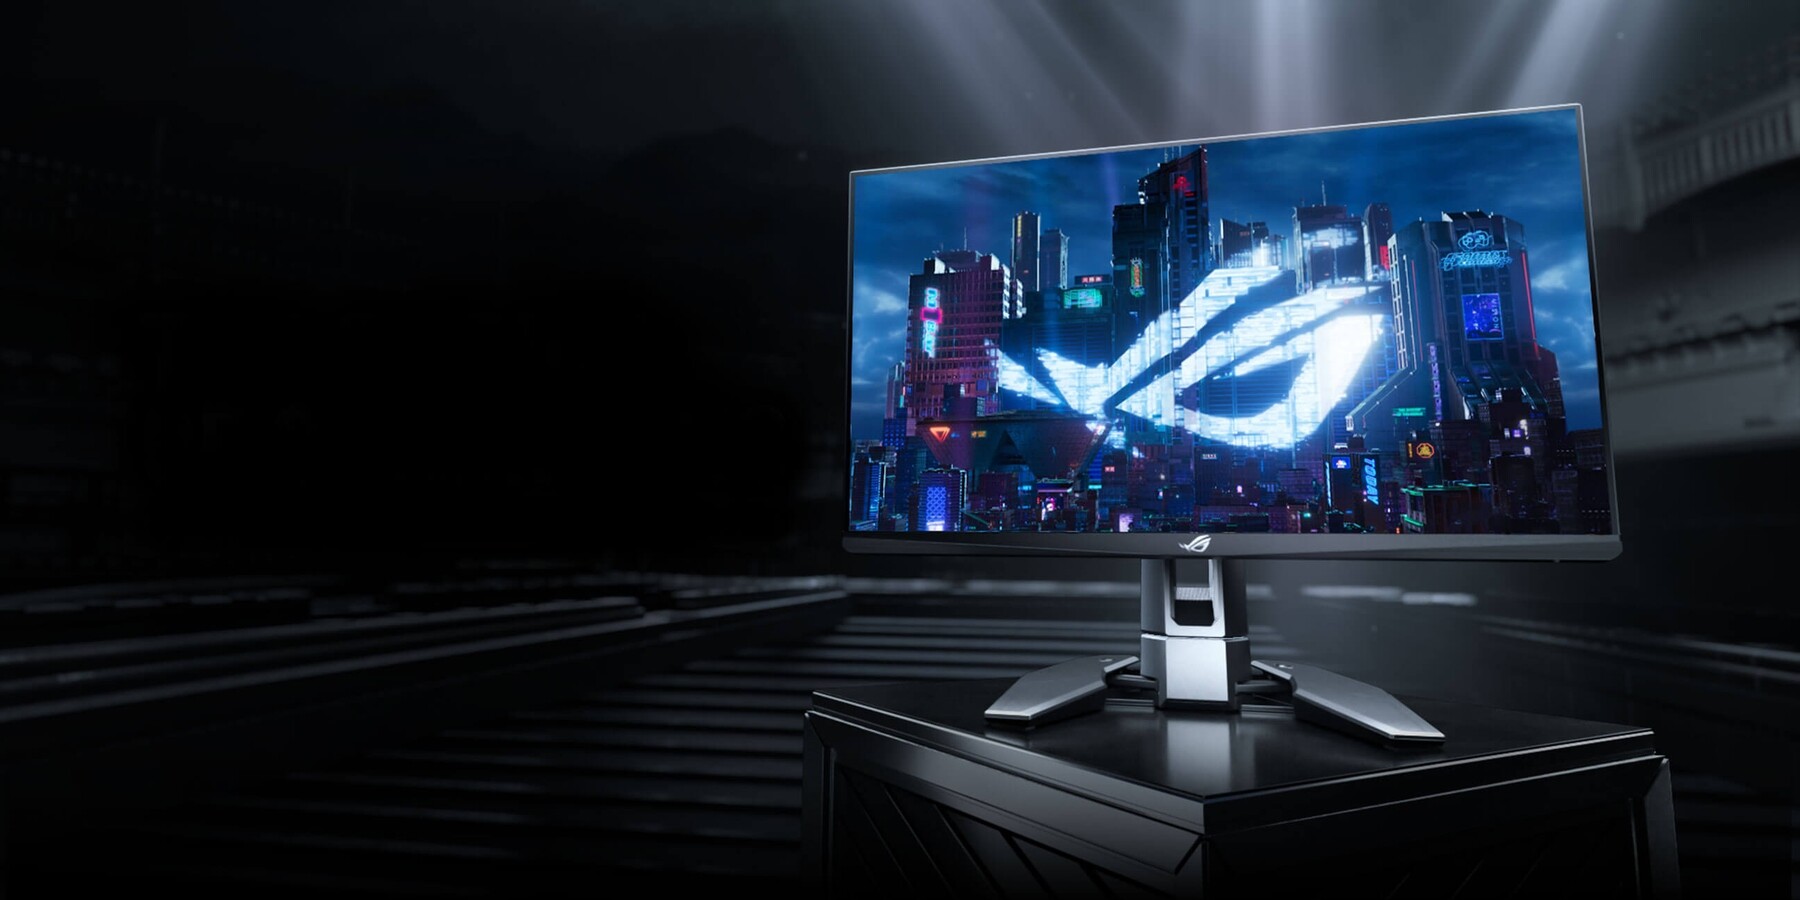 Around our necks is a 540Hz ASUS monitor